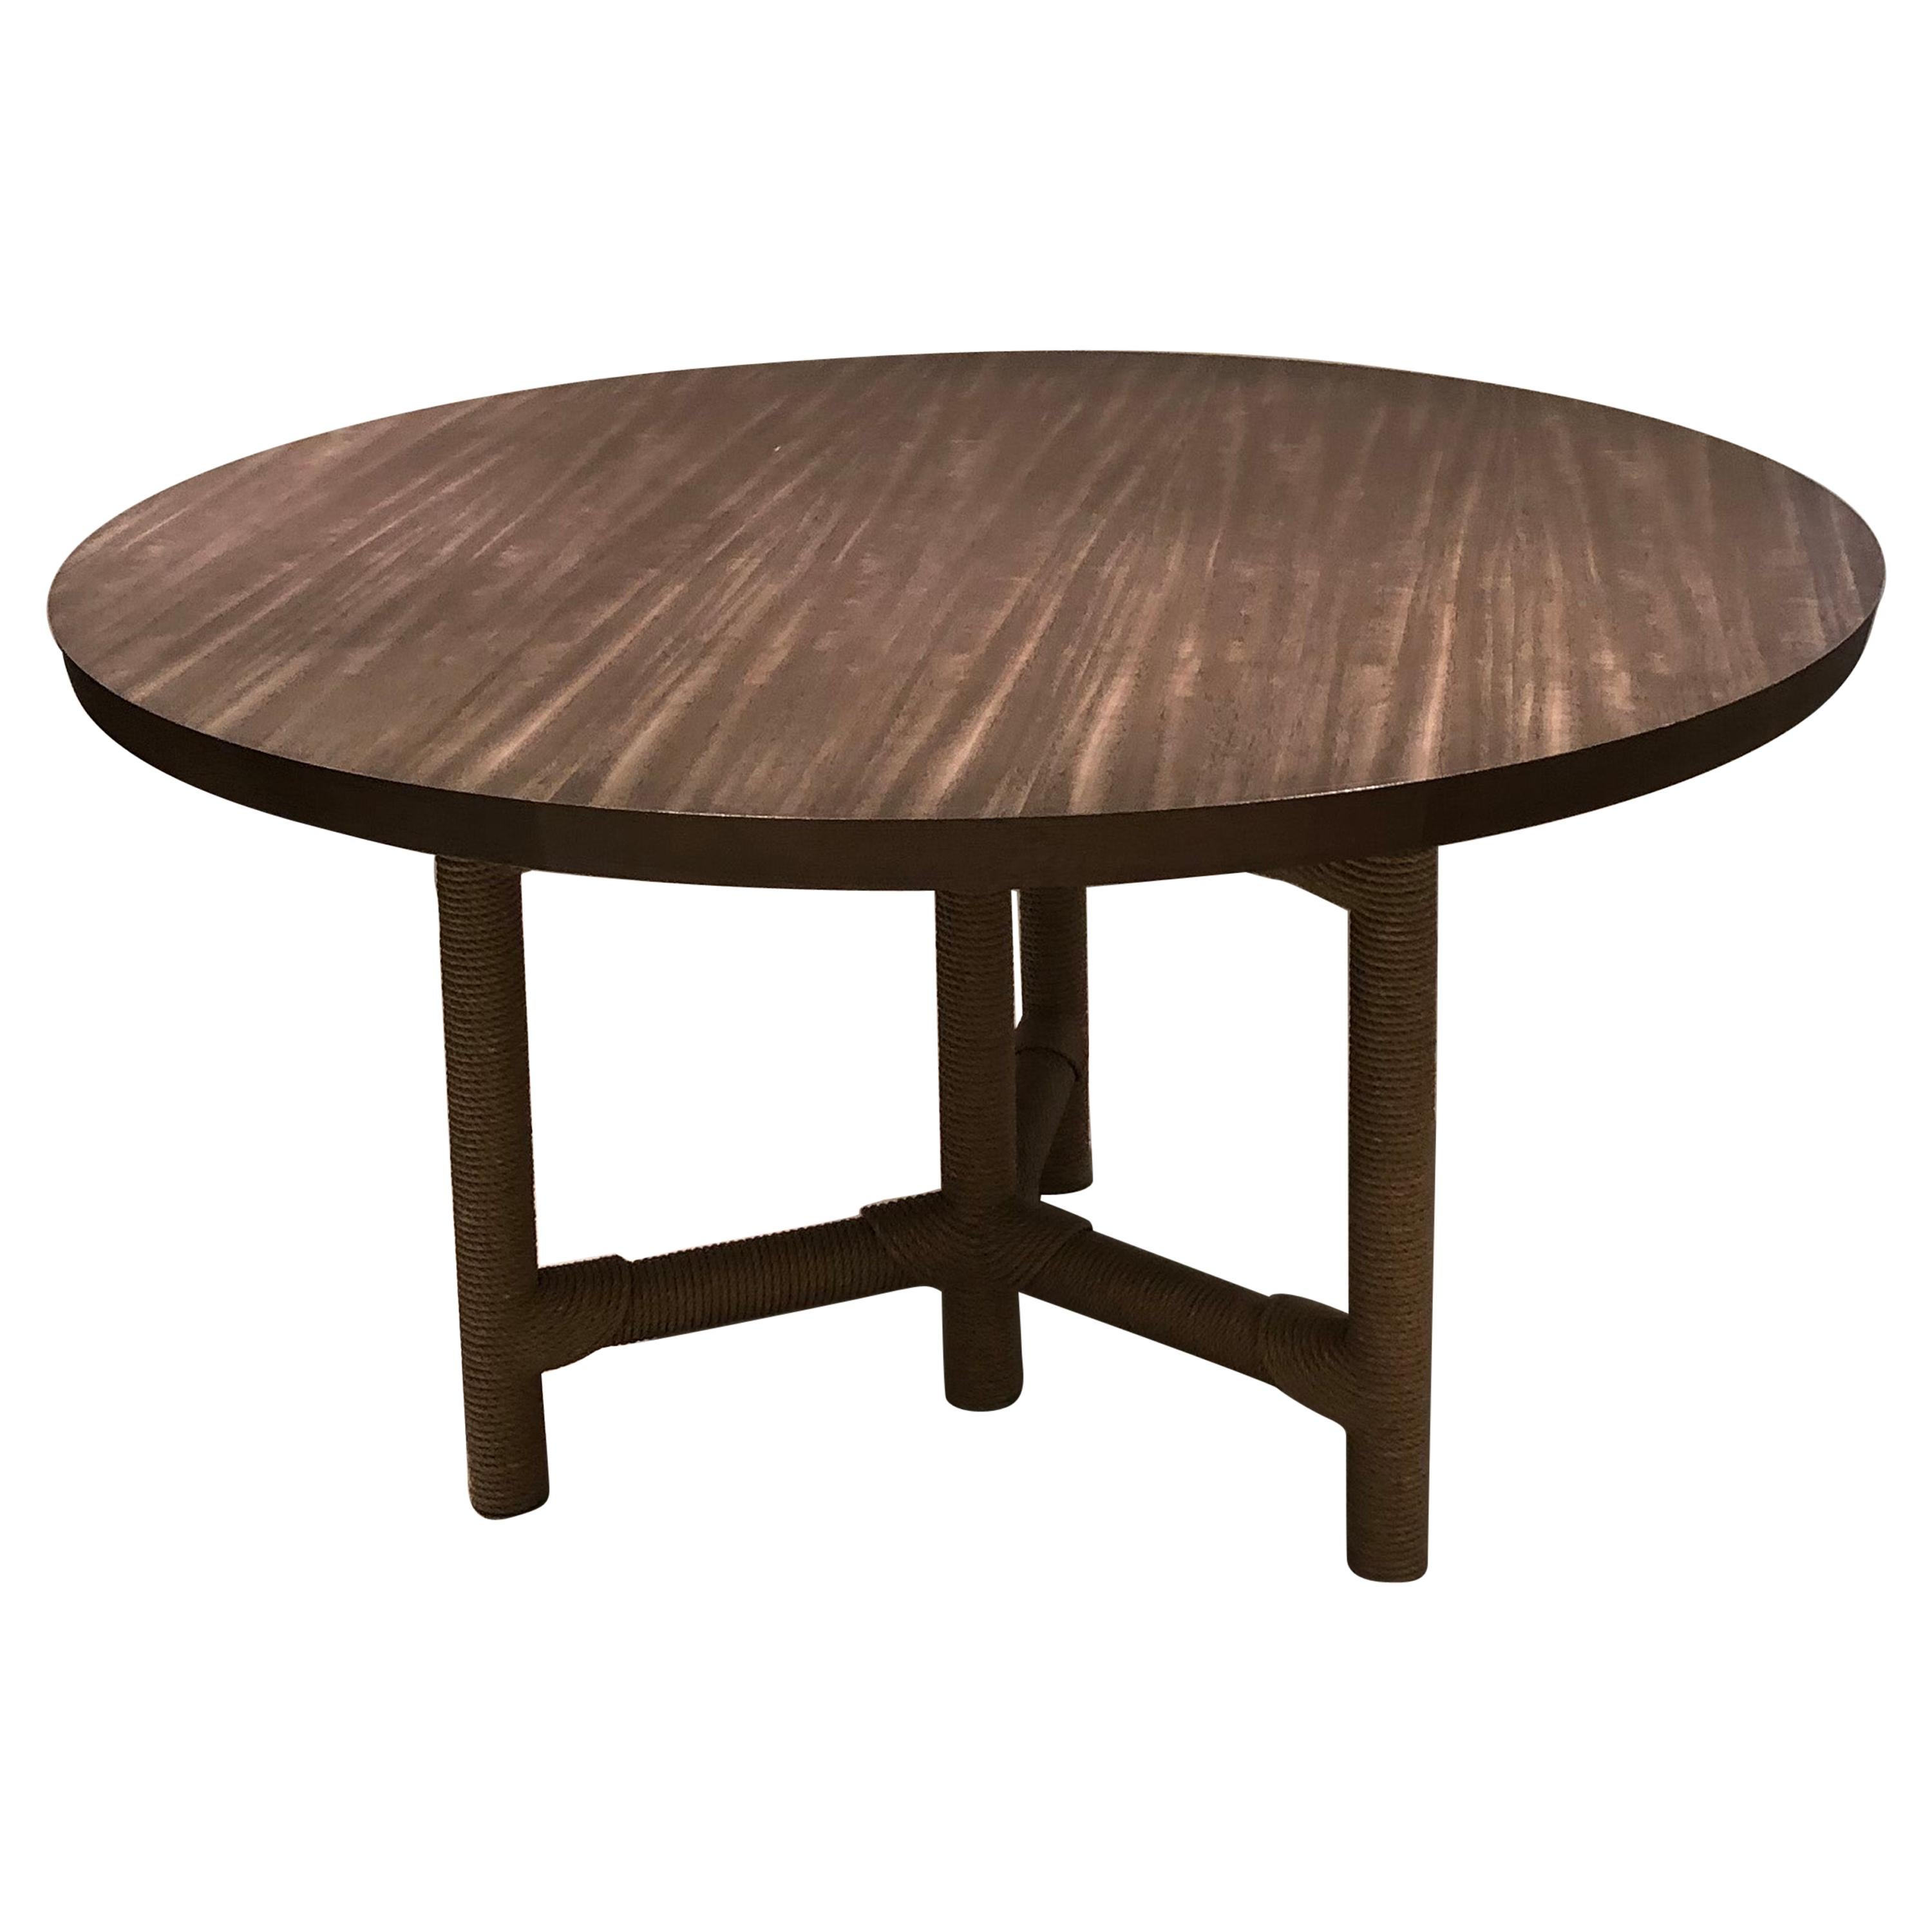 HOLLY HUNT HH2010117 Afriba Table in Paldao 185 by Christian Astuguevieille